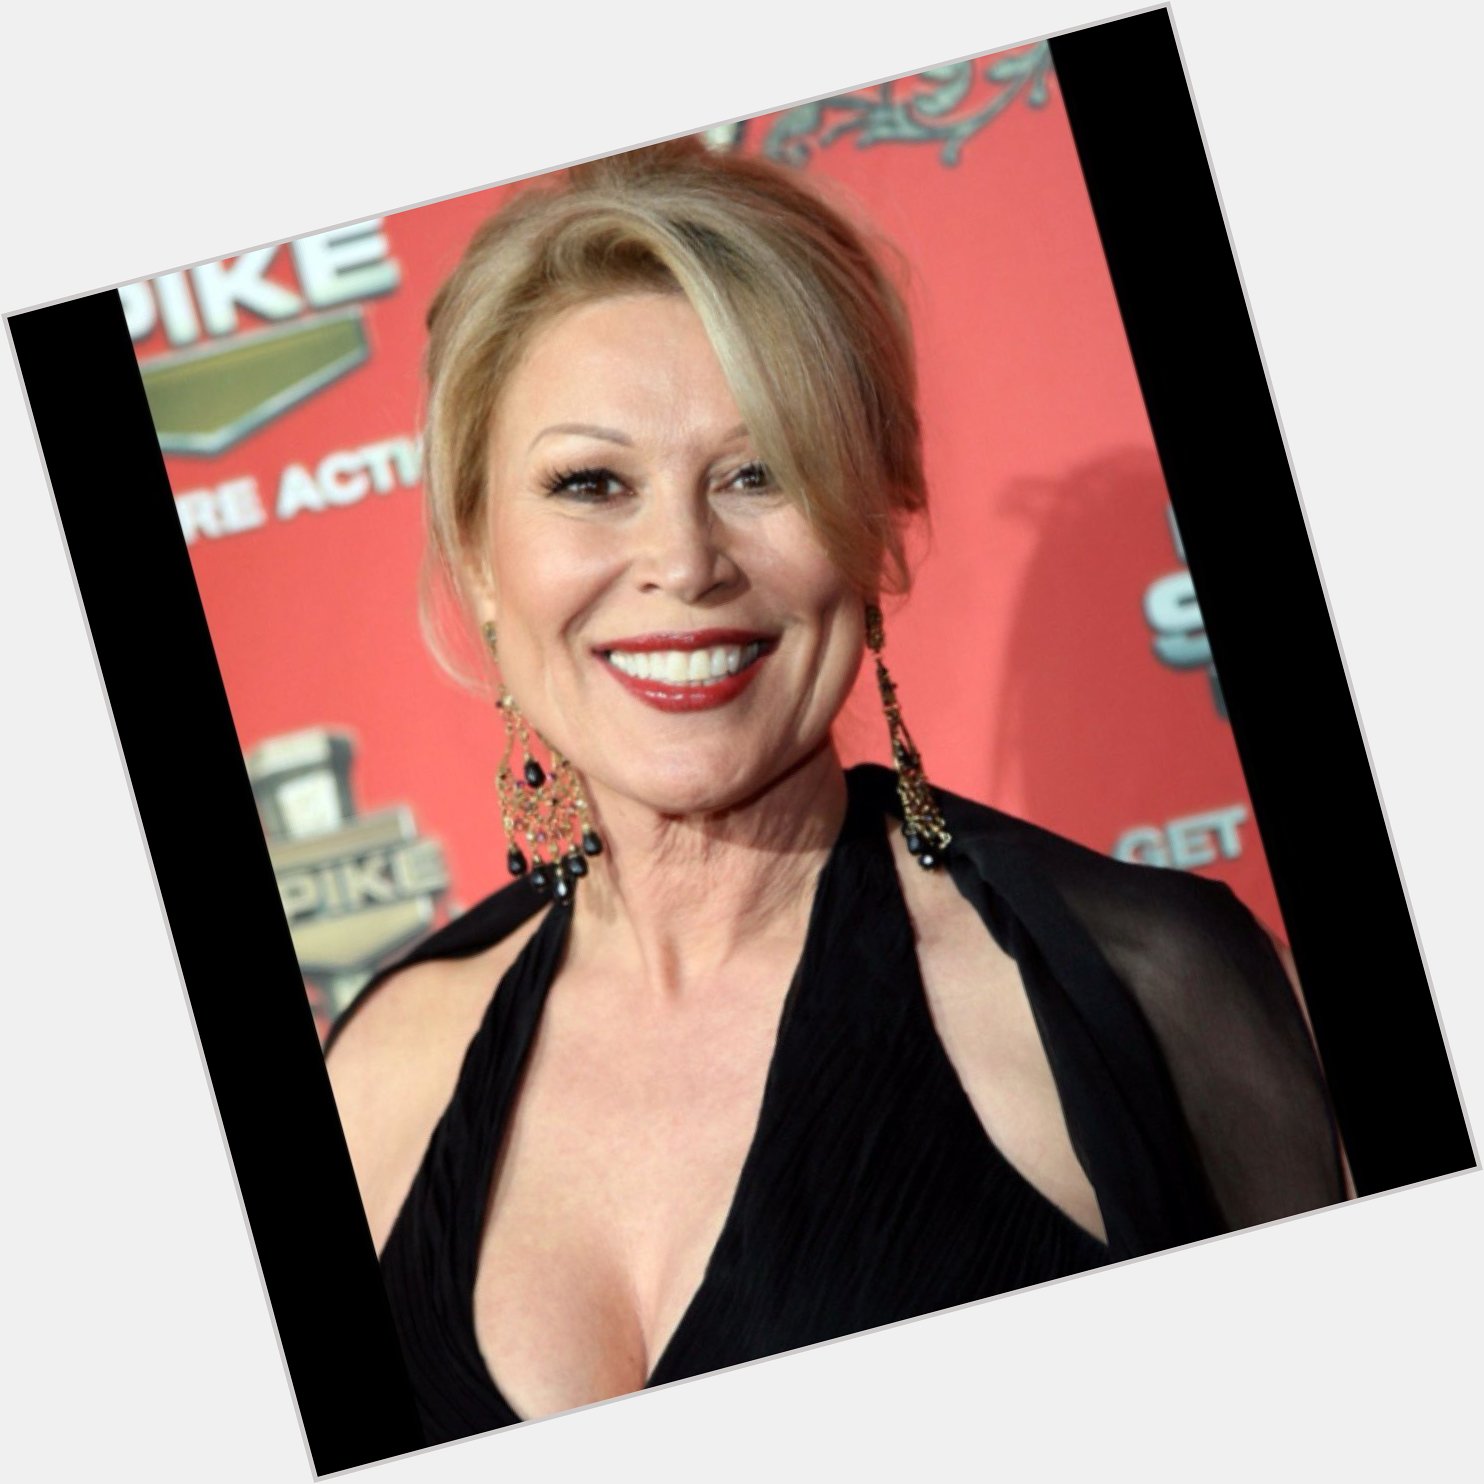 Happy Birthday Leslie Easterbrook (69) - who didn t wank over her scenes in Police Academy? Great tits 